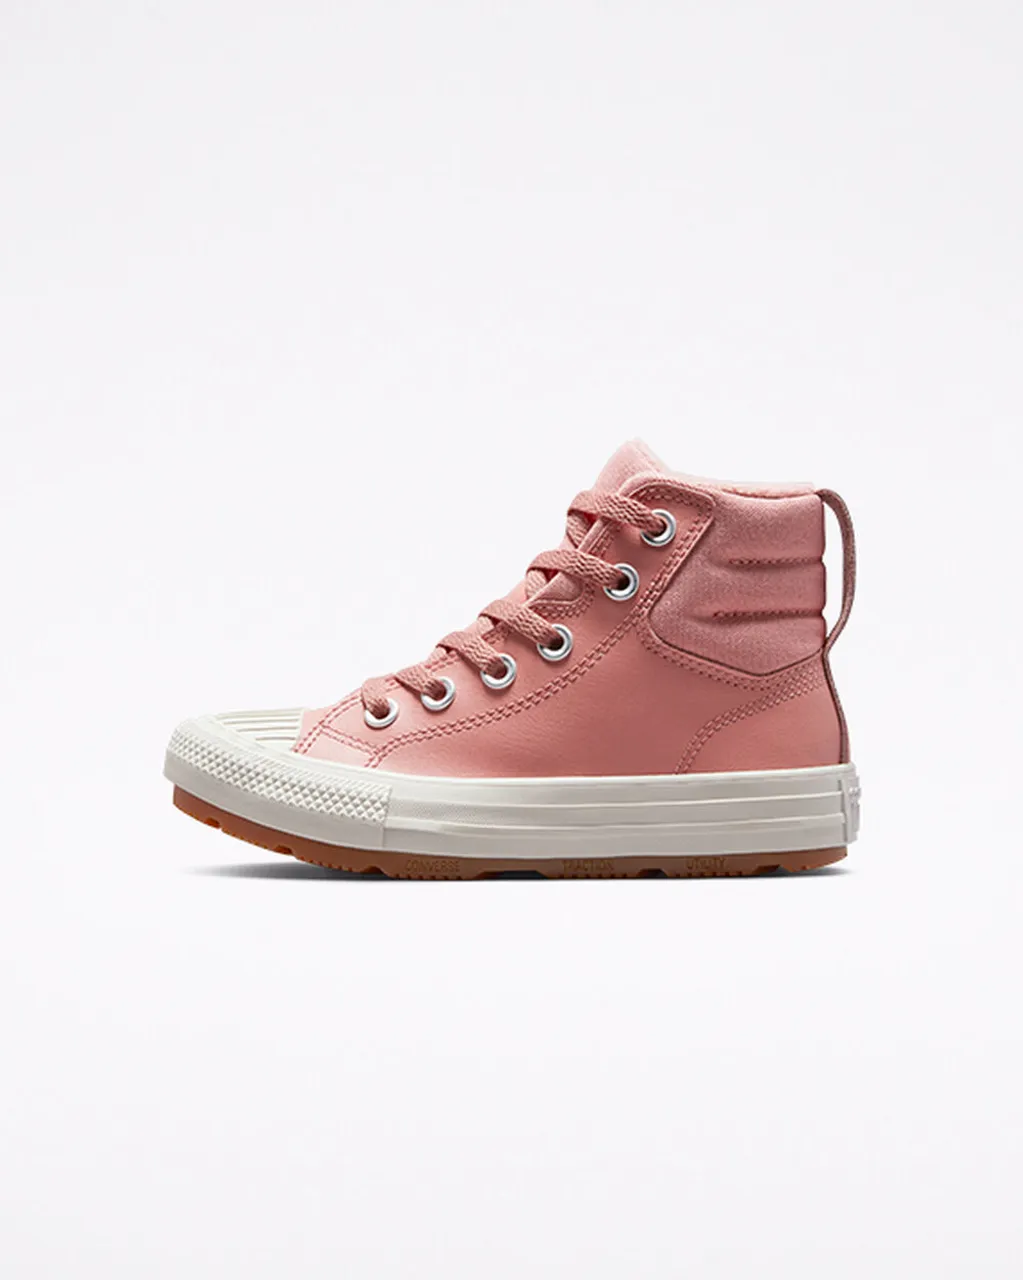 Converse Color Leather Chuck Taylor All Star Berkshire Boot Pink